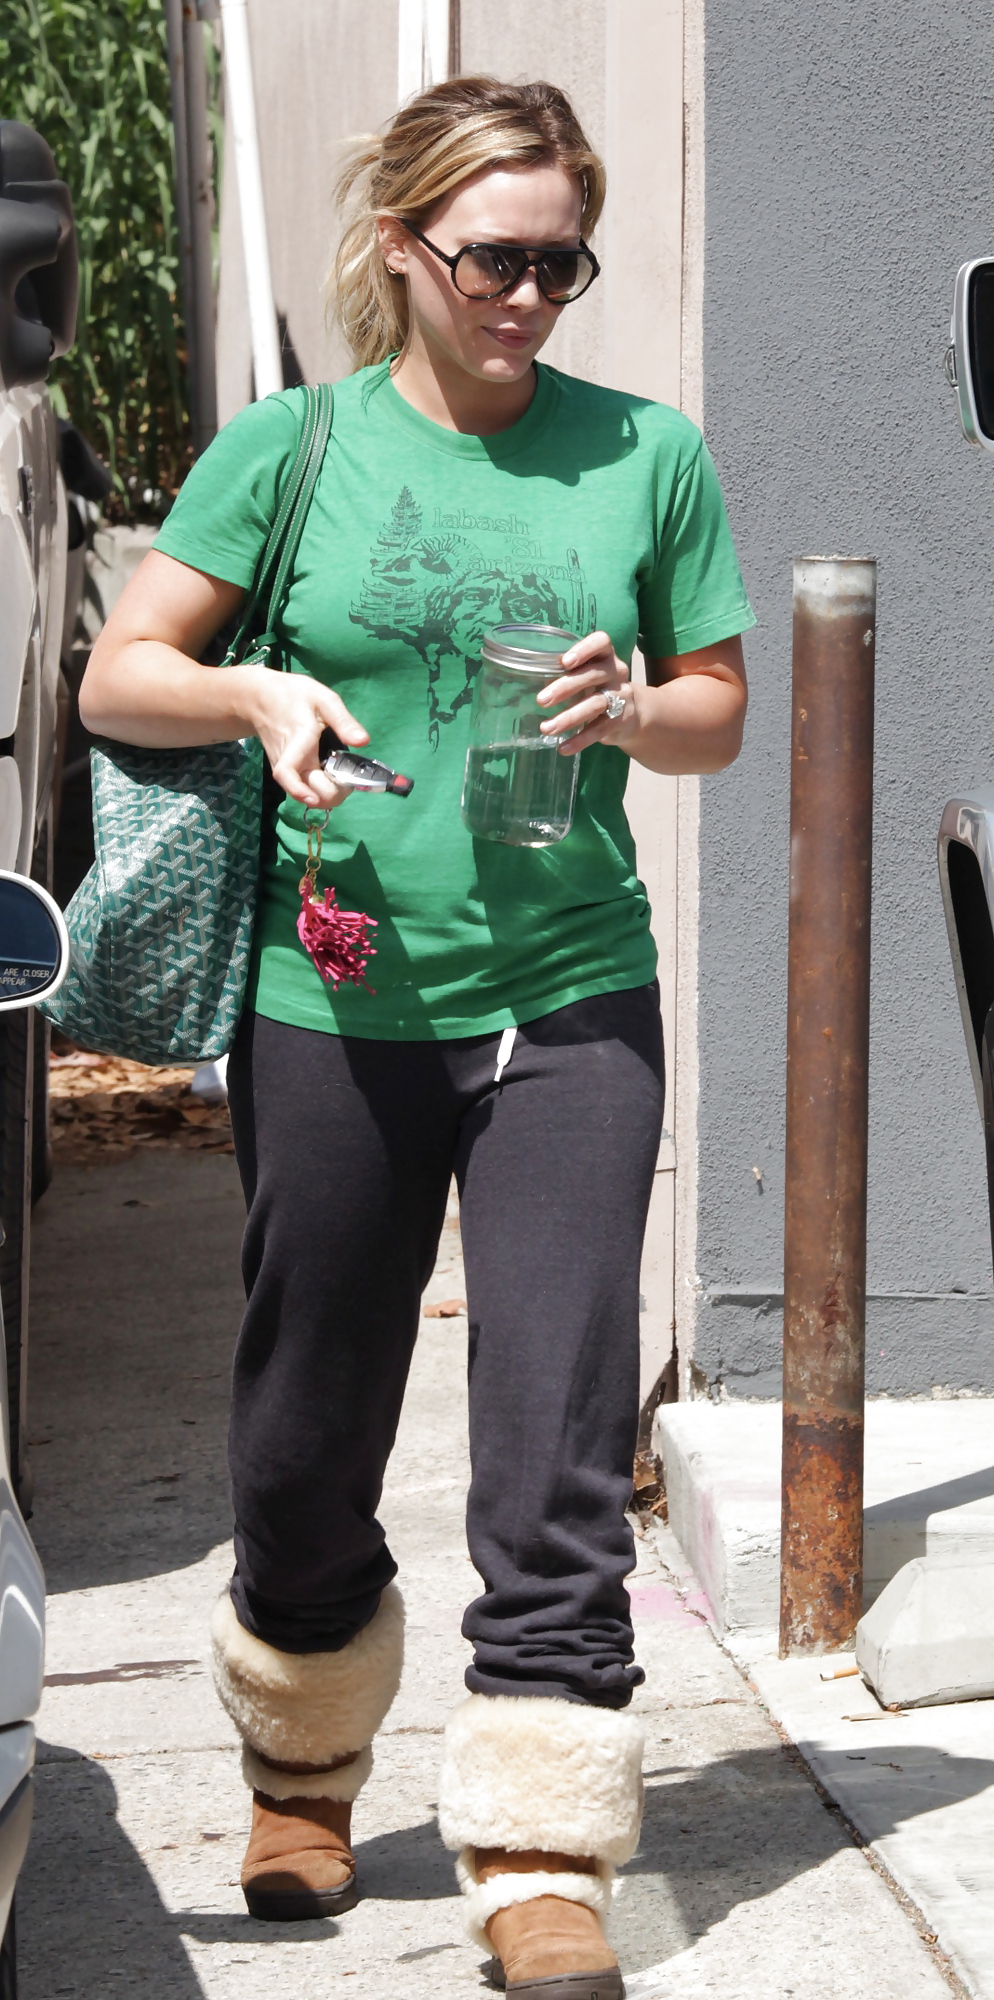 Hilary duff out n about toluca lake
 #5818248